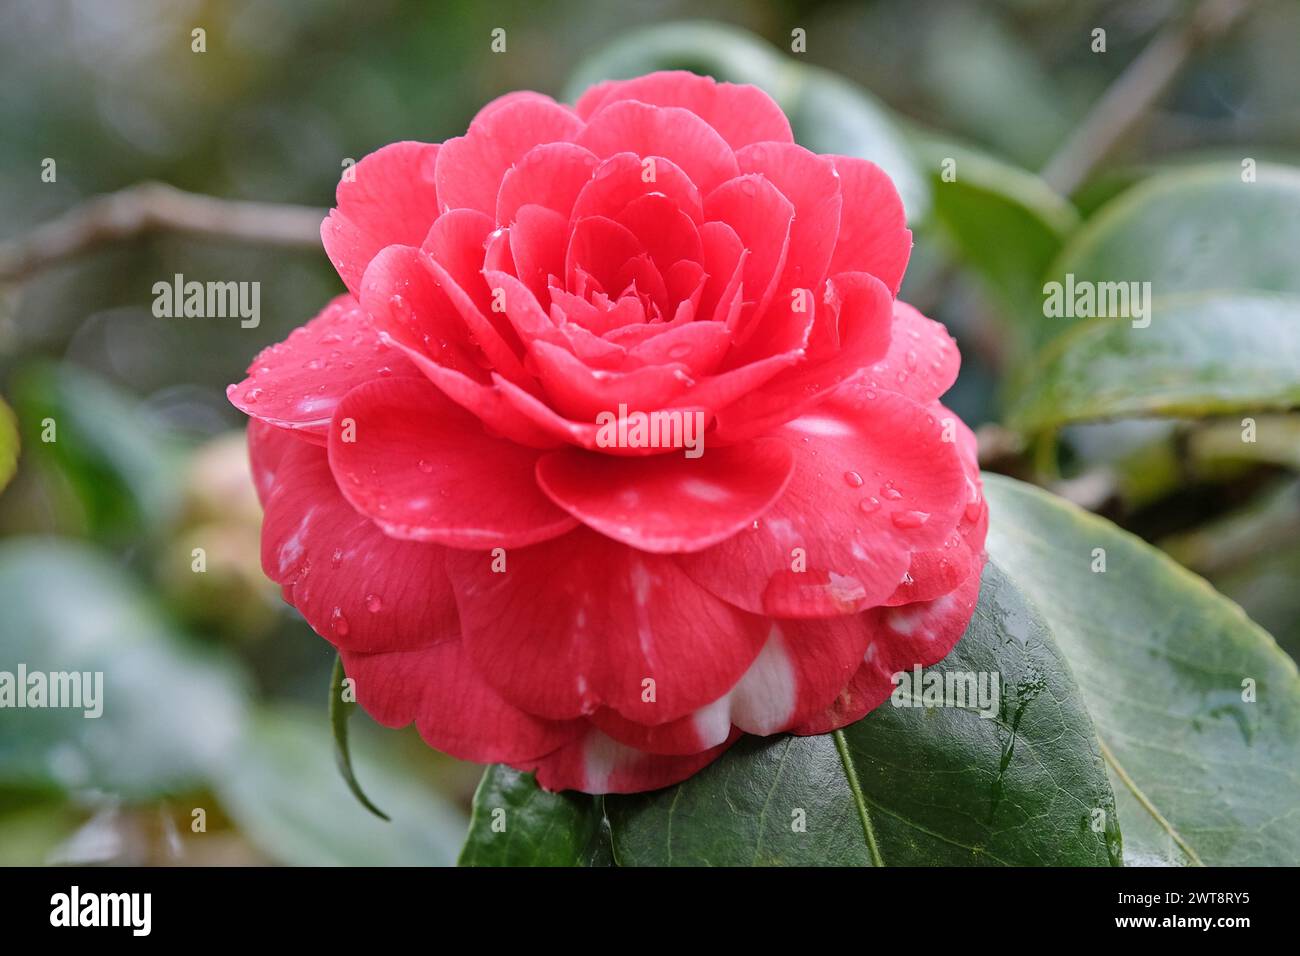 Red rosette double Camellia japonica ÔBlack TieÕ in flower. Stock Photo